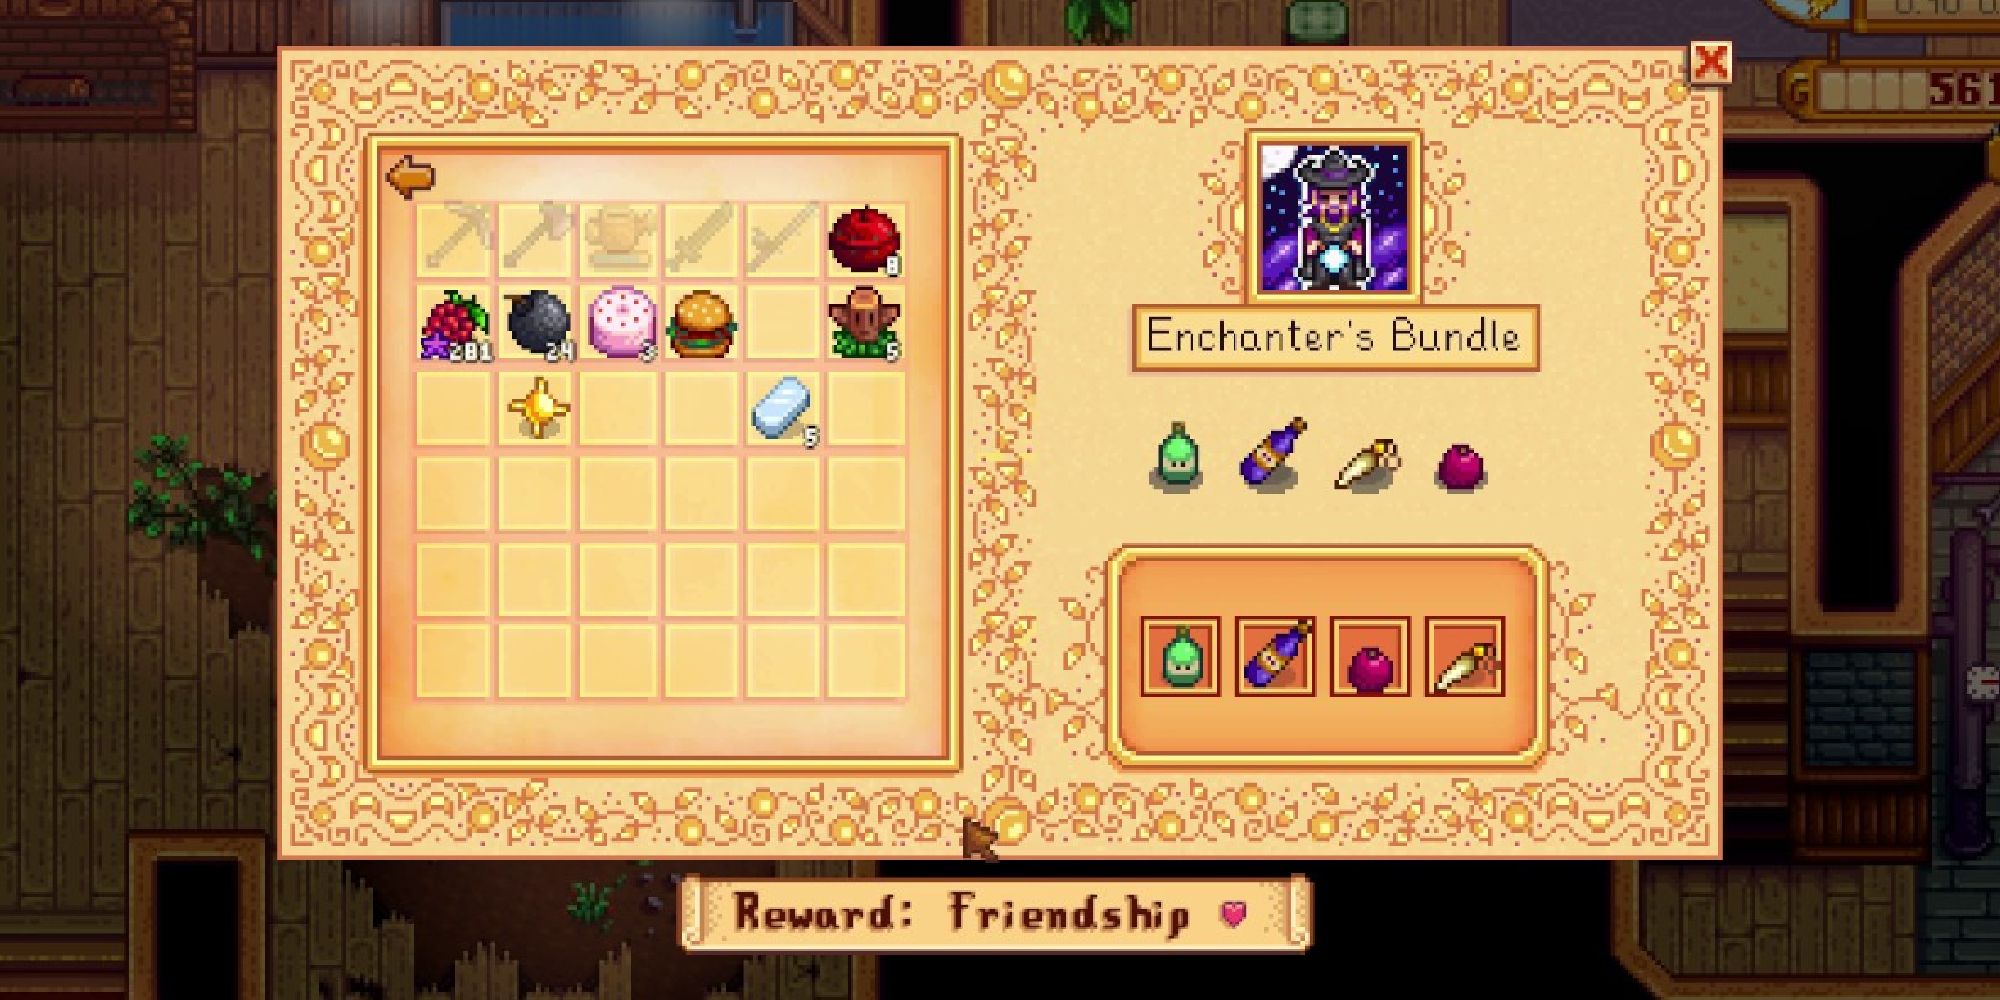 stardew valley player completing the enchanter's bundle